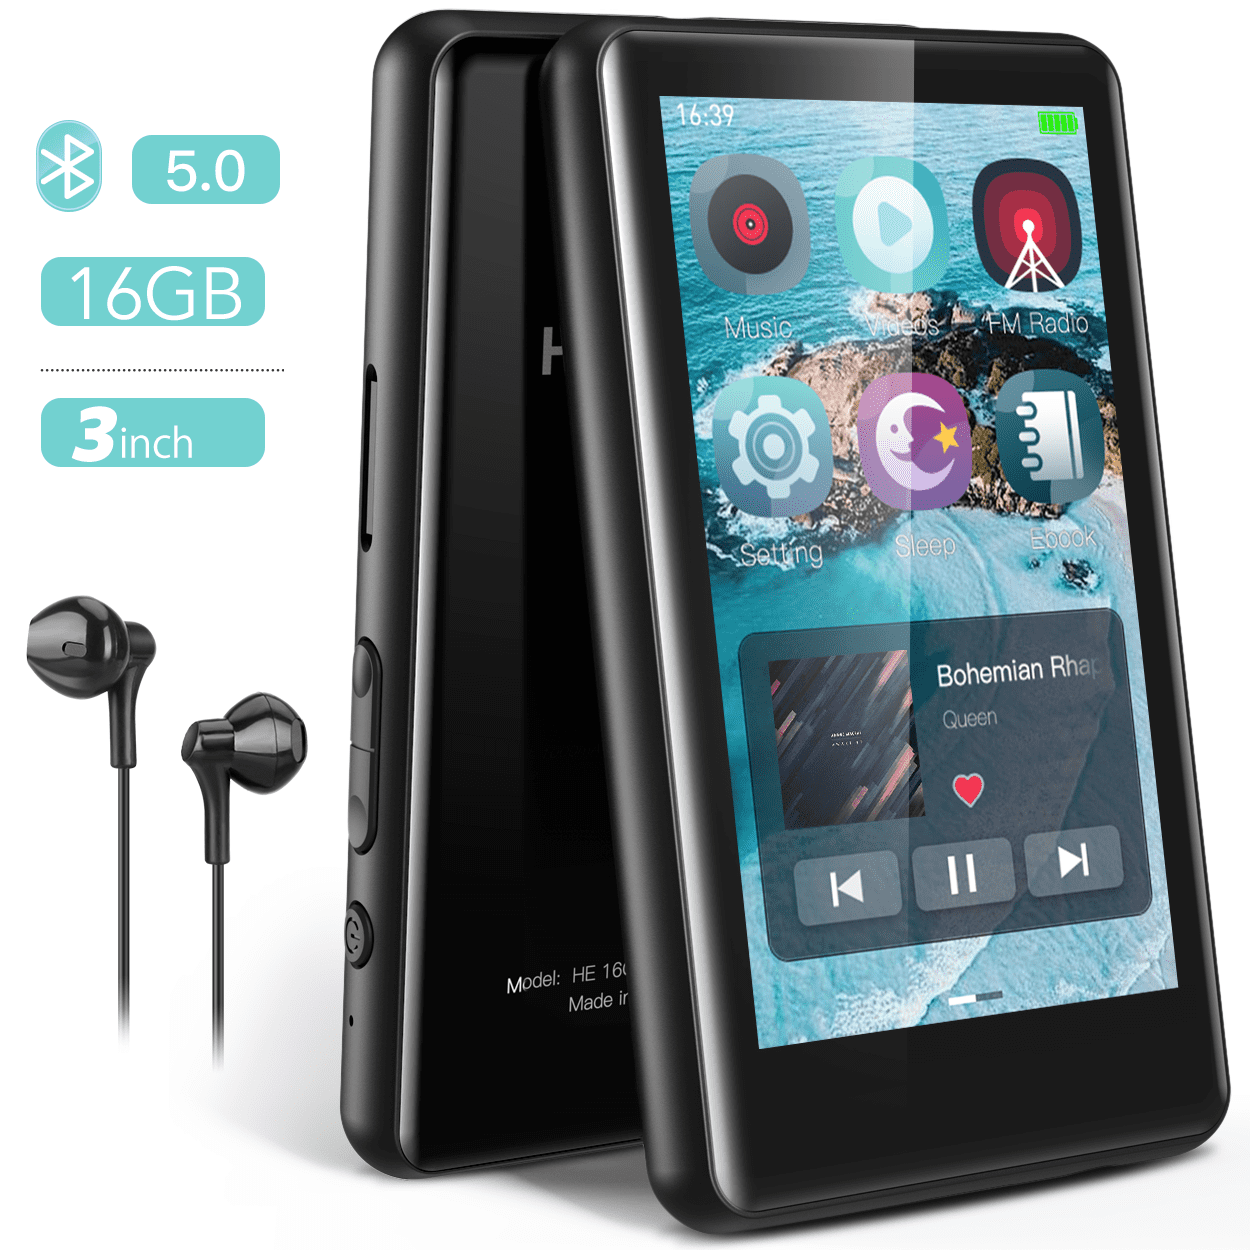 Hommie Bluetooth MP4 Player, Touch Screen, Compatible Video, Games, FM